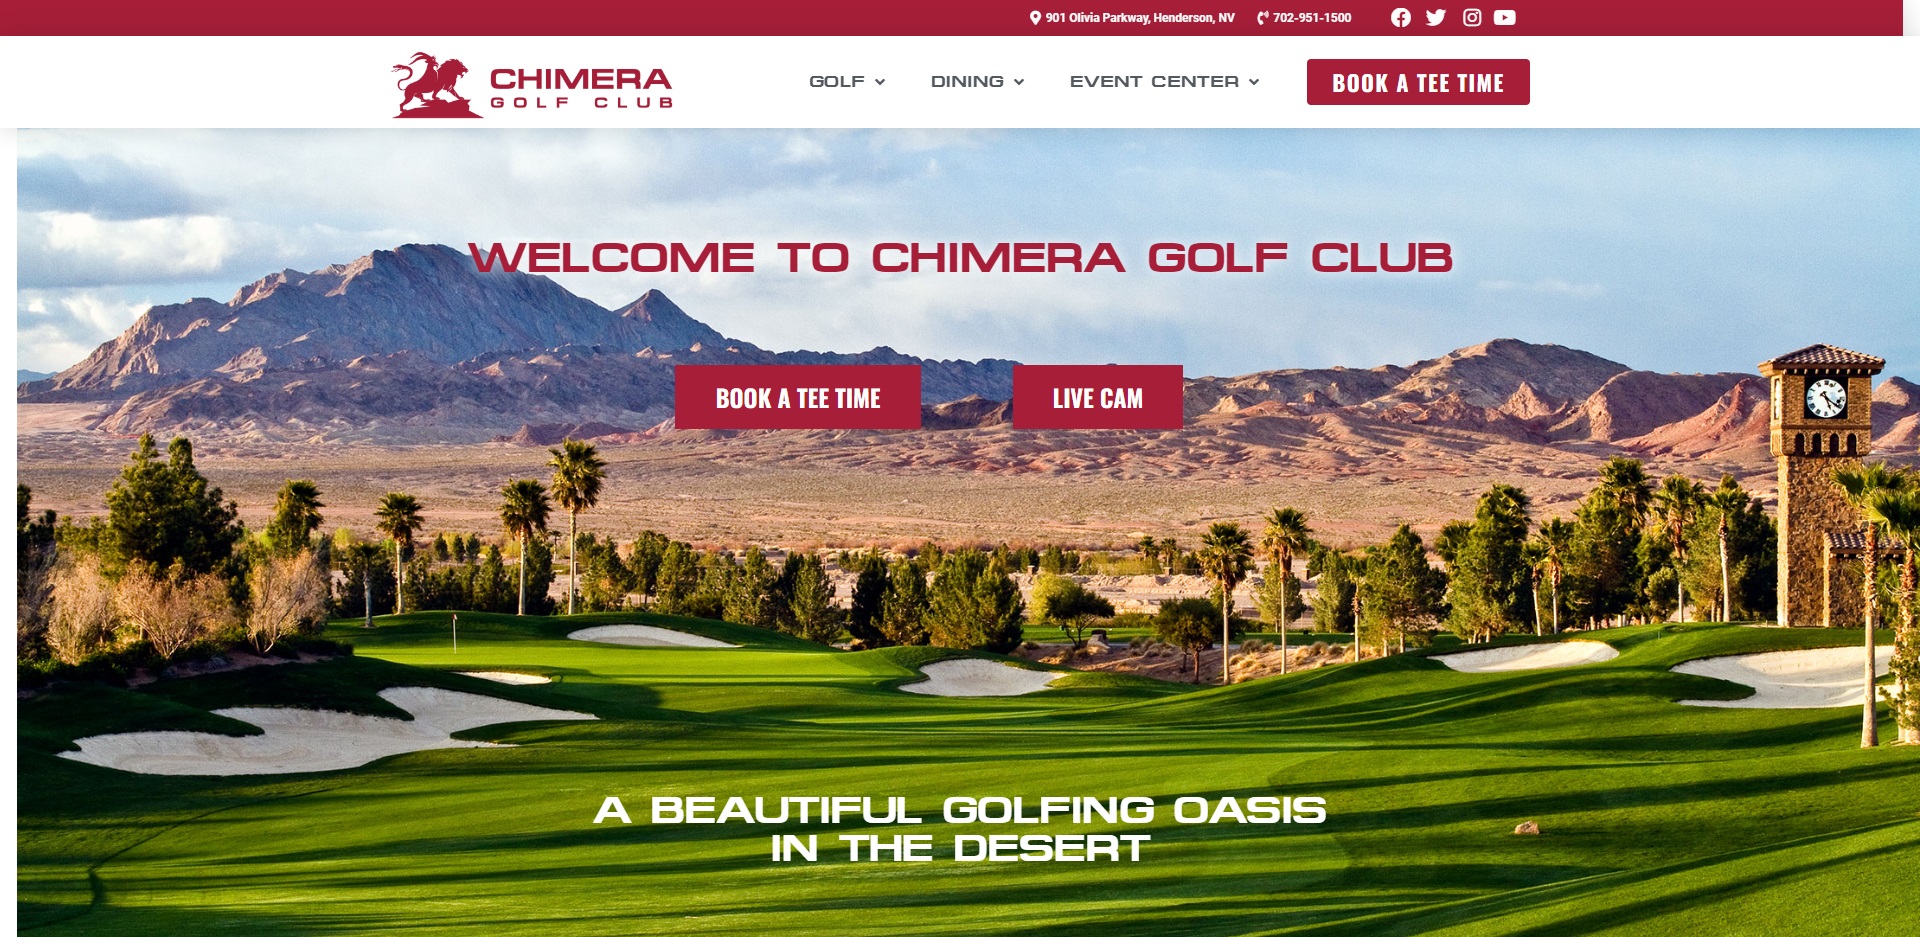 The Best Golf Courses in Henderson, NV